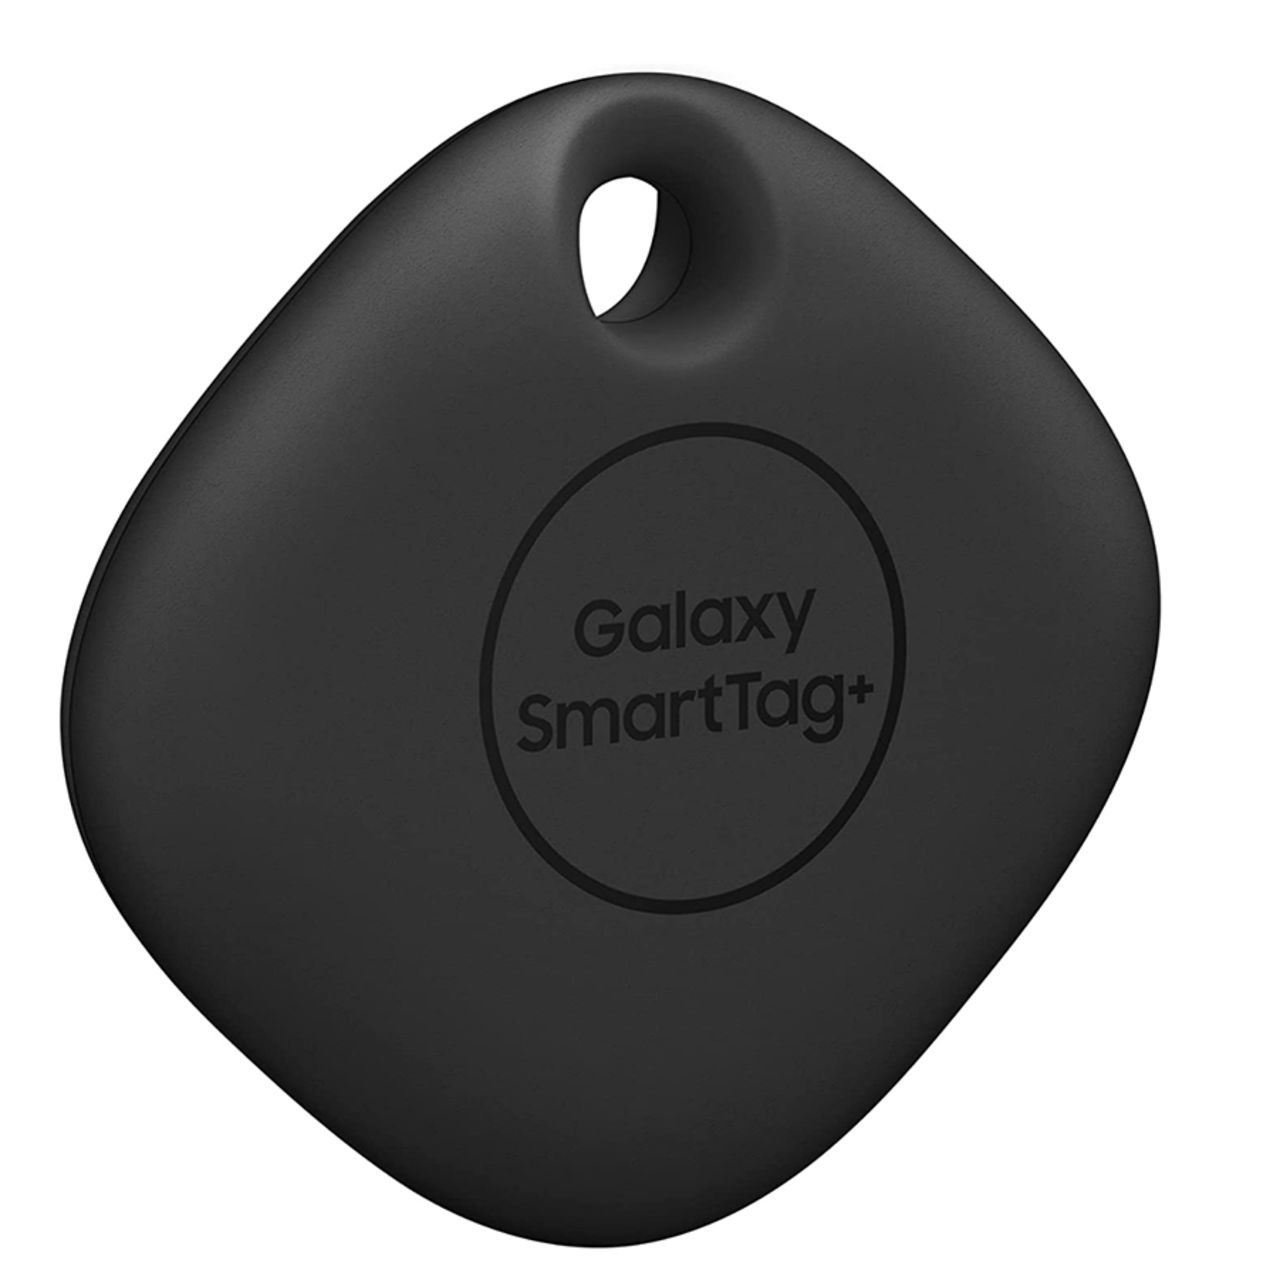 Samsung Galaxy SmartTag 2 - first look at the latest AirTag competitor